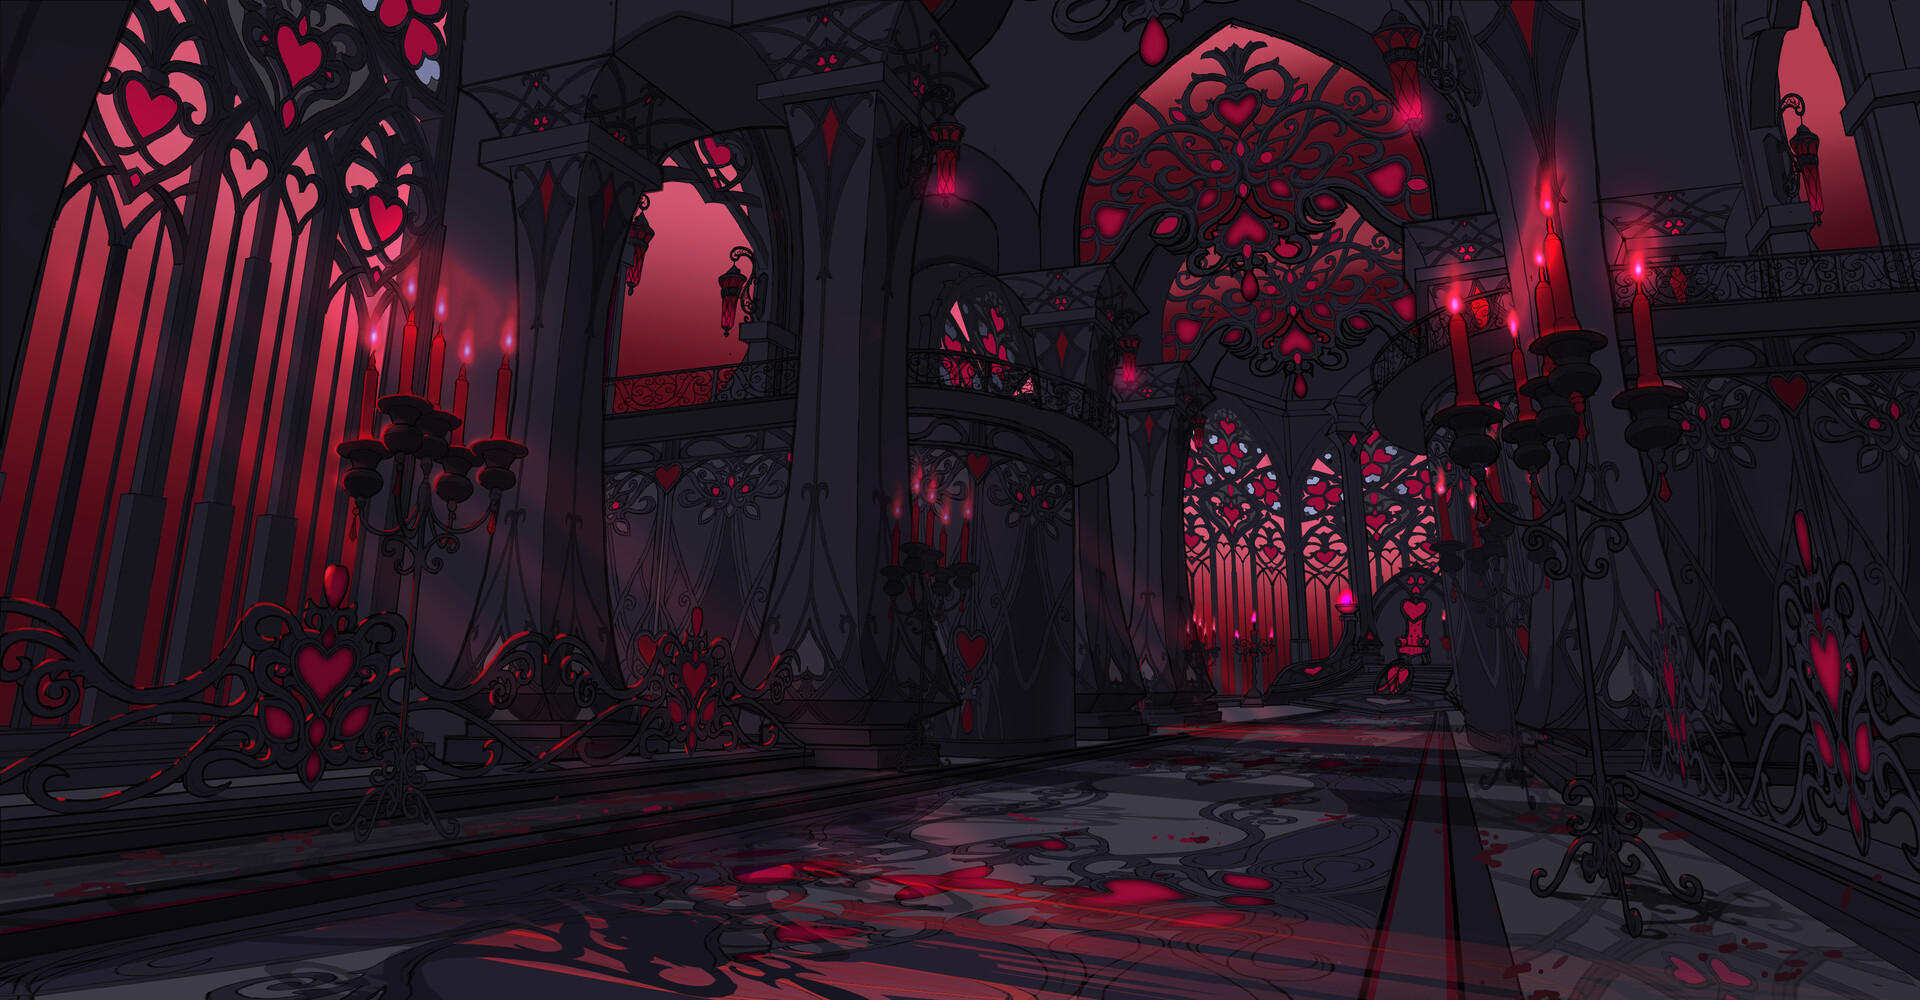 General 1920x1000 Liuying JP digital art fantasy art heart stained glass cathedral red candles hallway throne